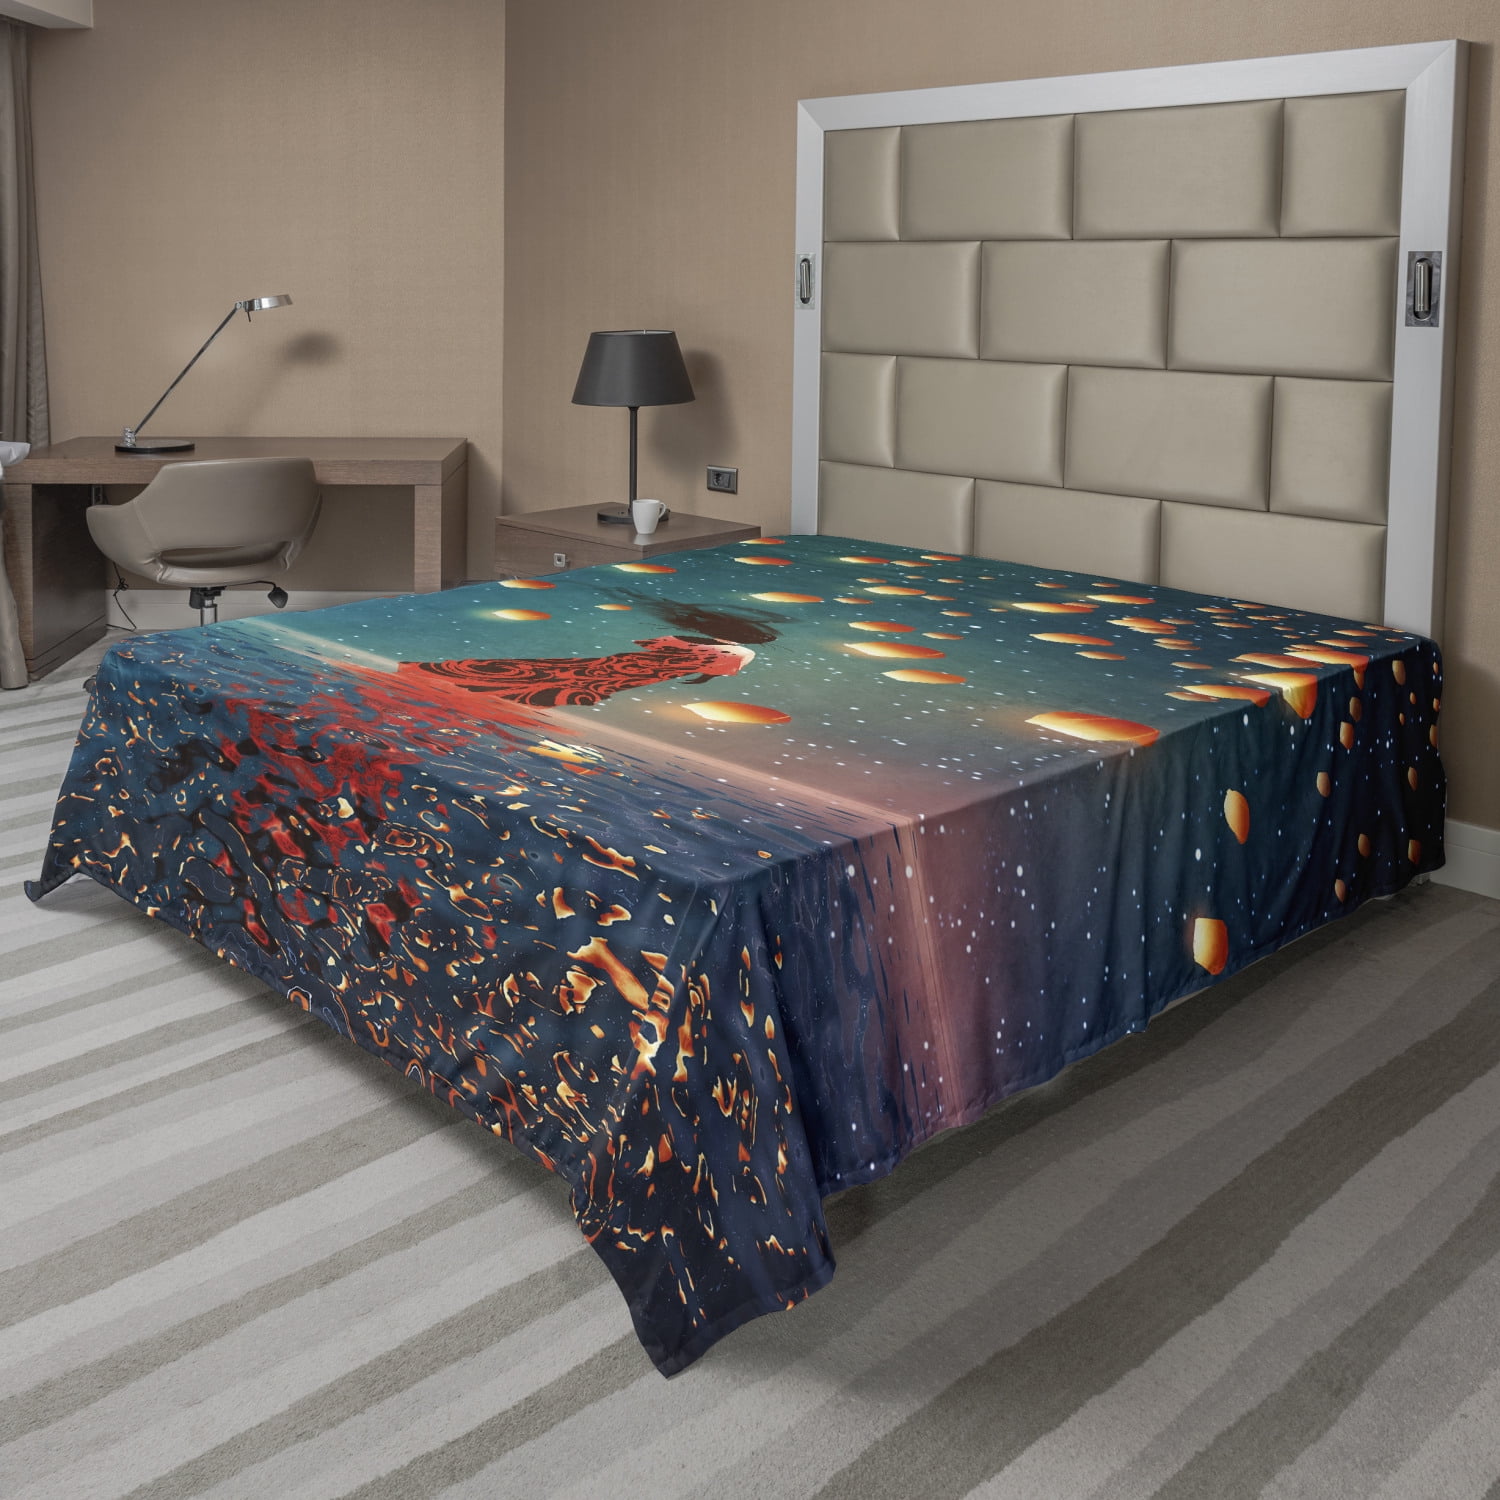 Details about   Ambesonne Geometrical Flat Sheet Top Sheet Decorative Bedding 6 Sizes